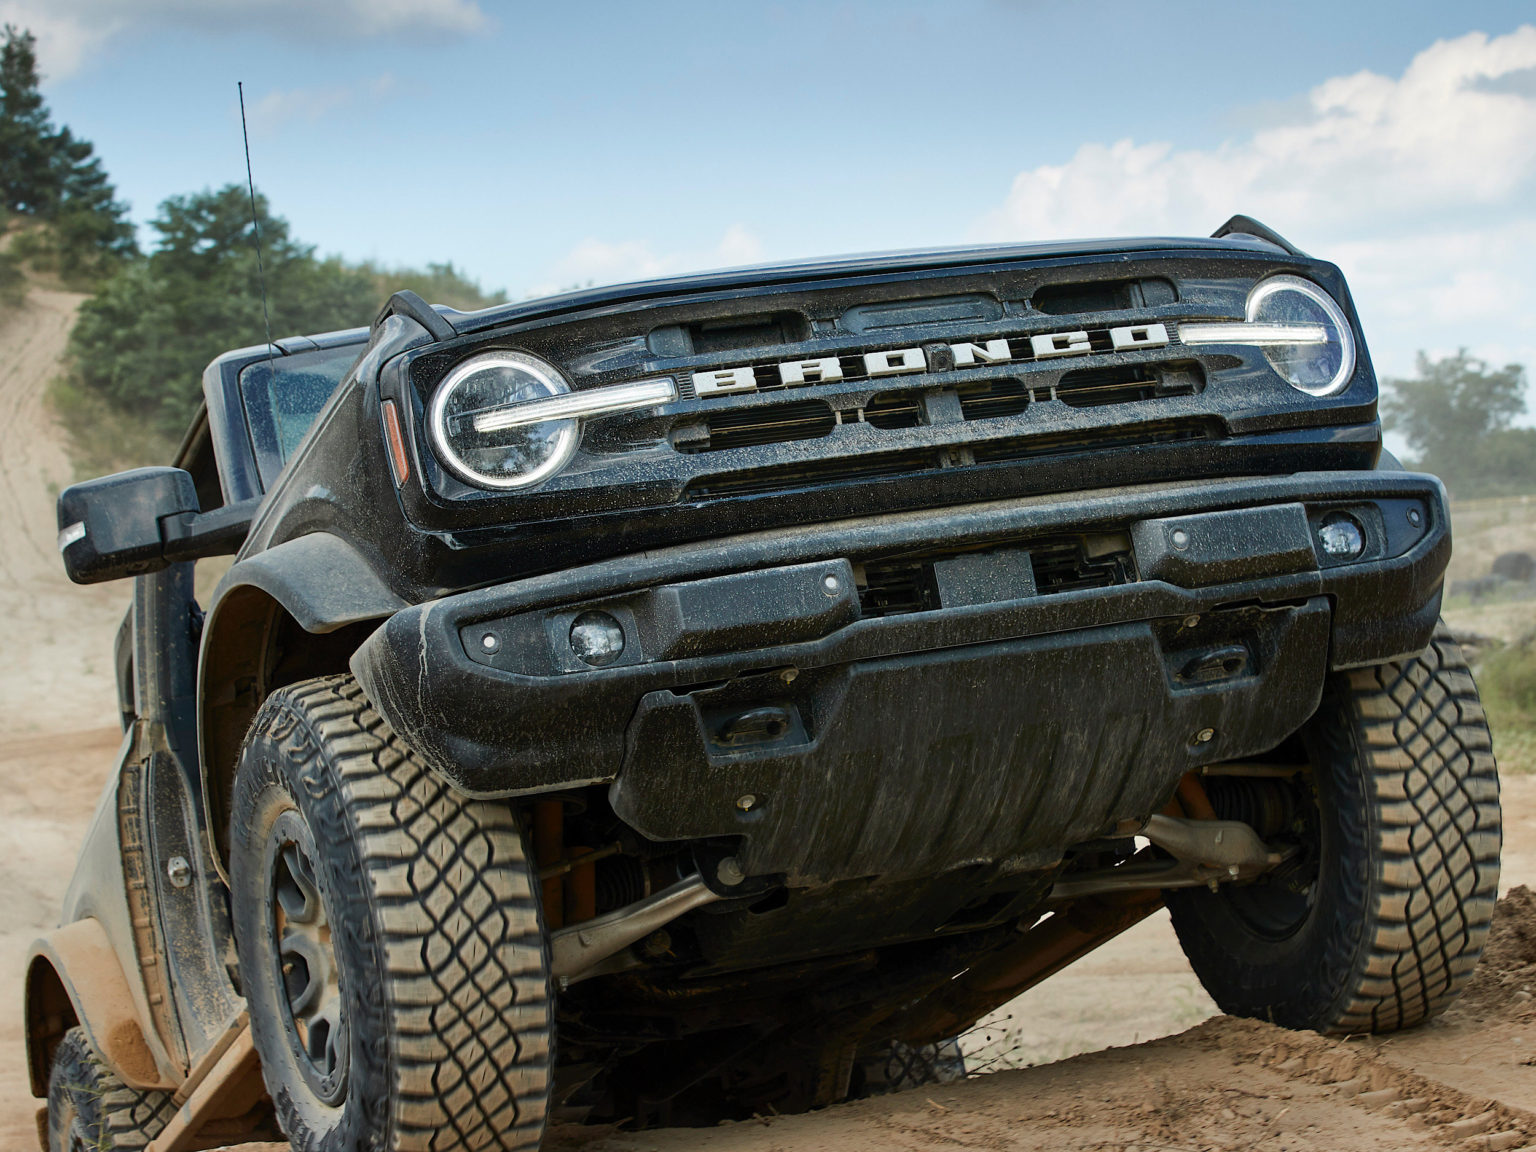 The Ford Bronco got its first test in front of the media during an off-roading day last week.